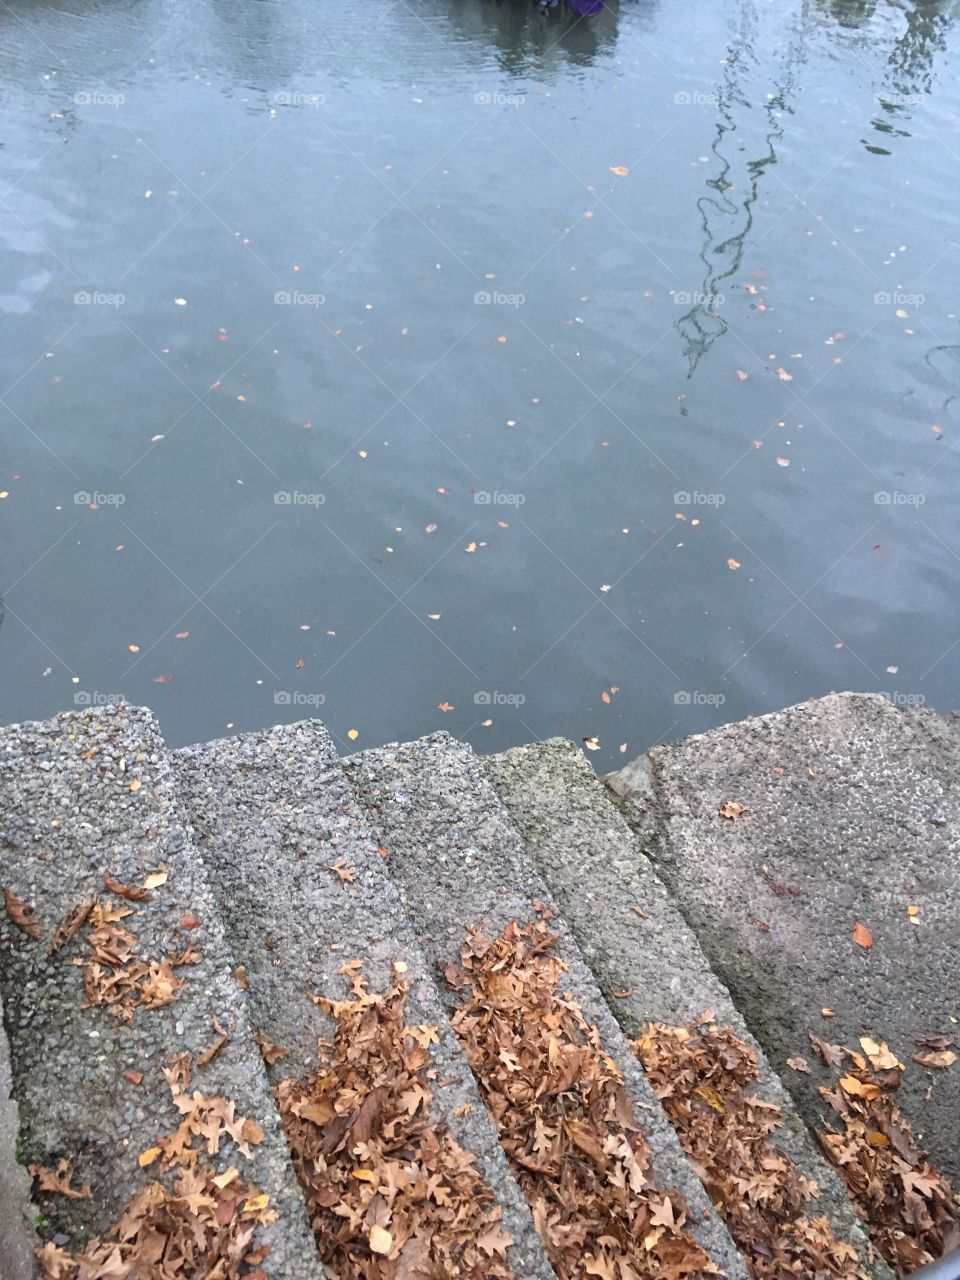 A simple photo but rather one that matters, the fallen leaves on the landing stage, coupled with the reflective ripples, ensures an end product of note.